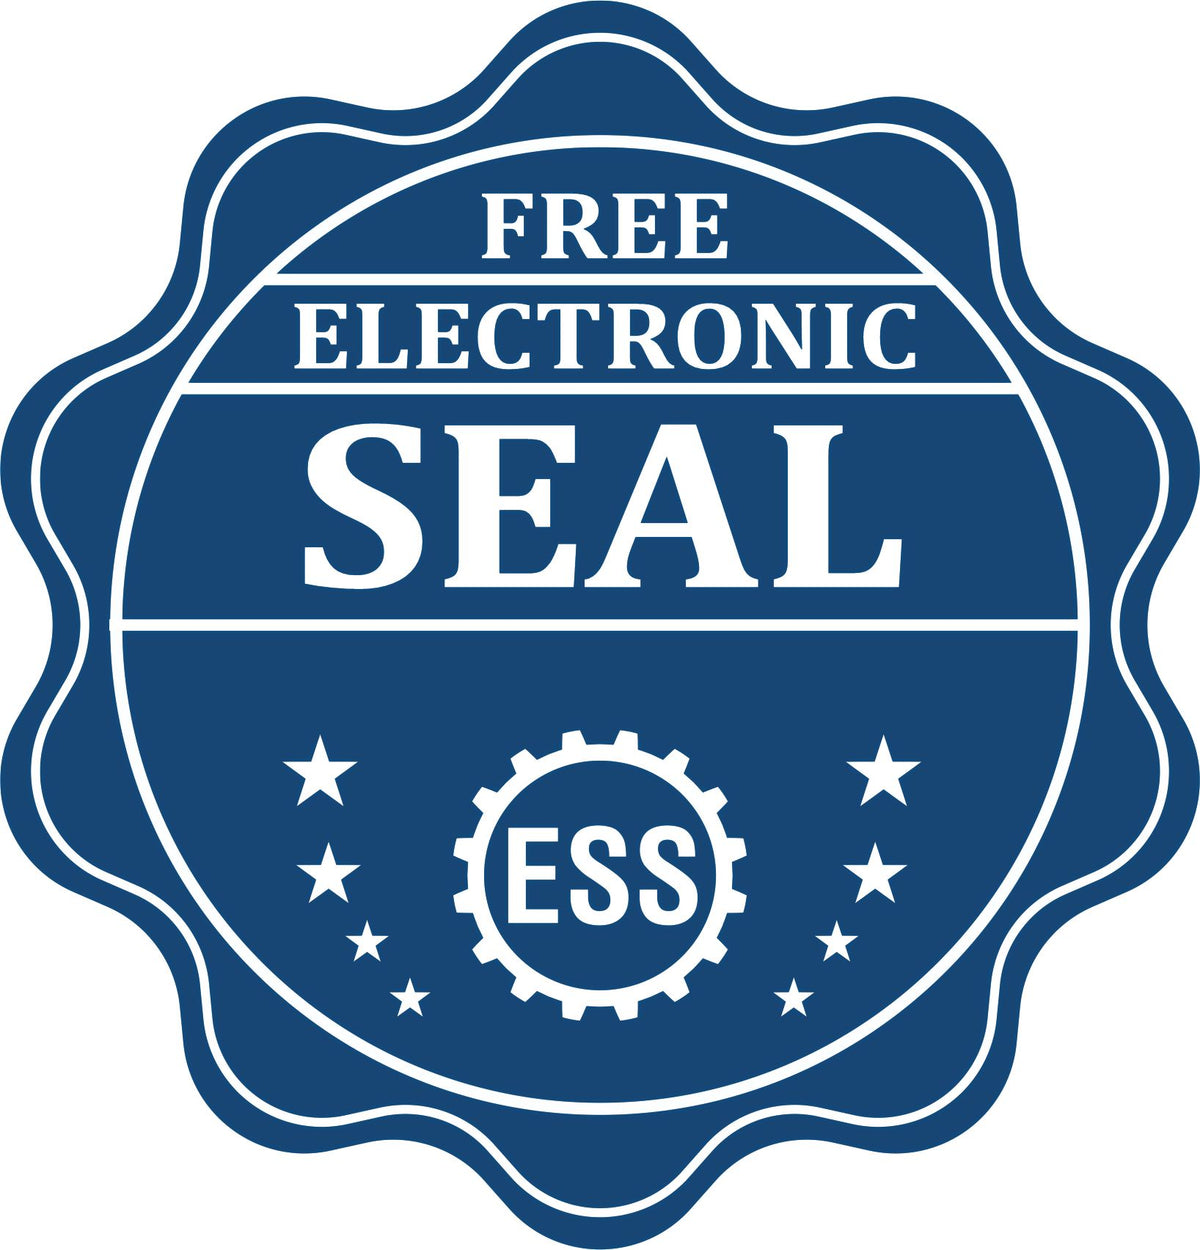 A badge showing a free electronic seal for the State of South Dakota Soft Land Surveyor Embossing Seal with stars and the ESS gear on the emblem.